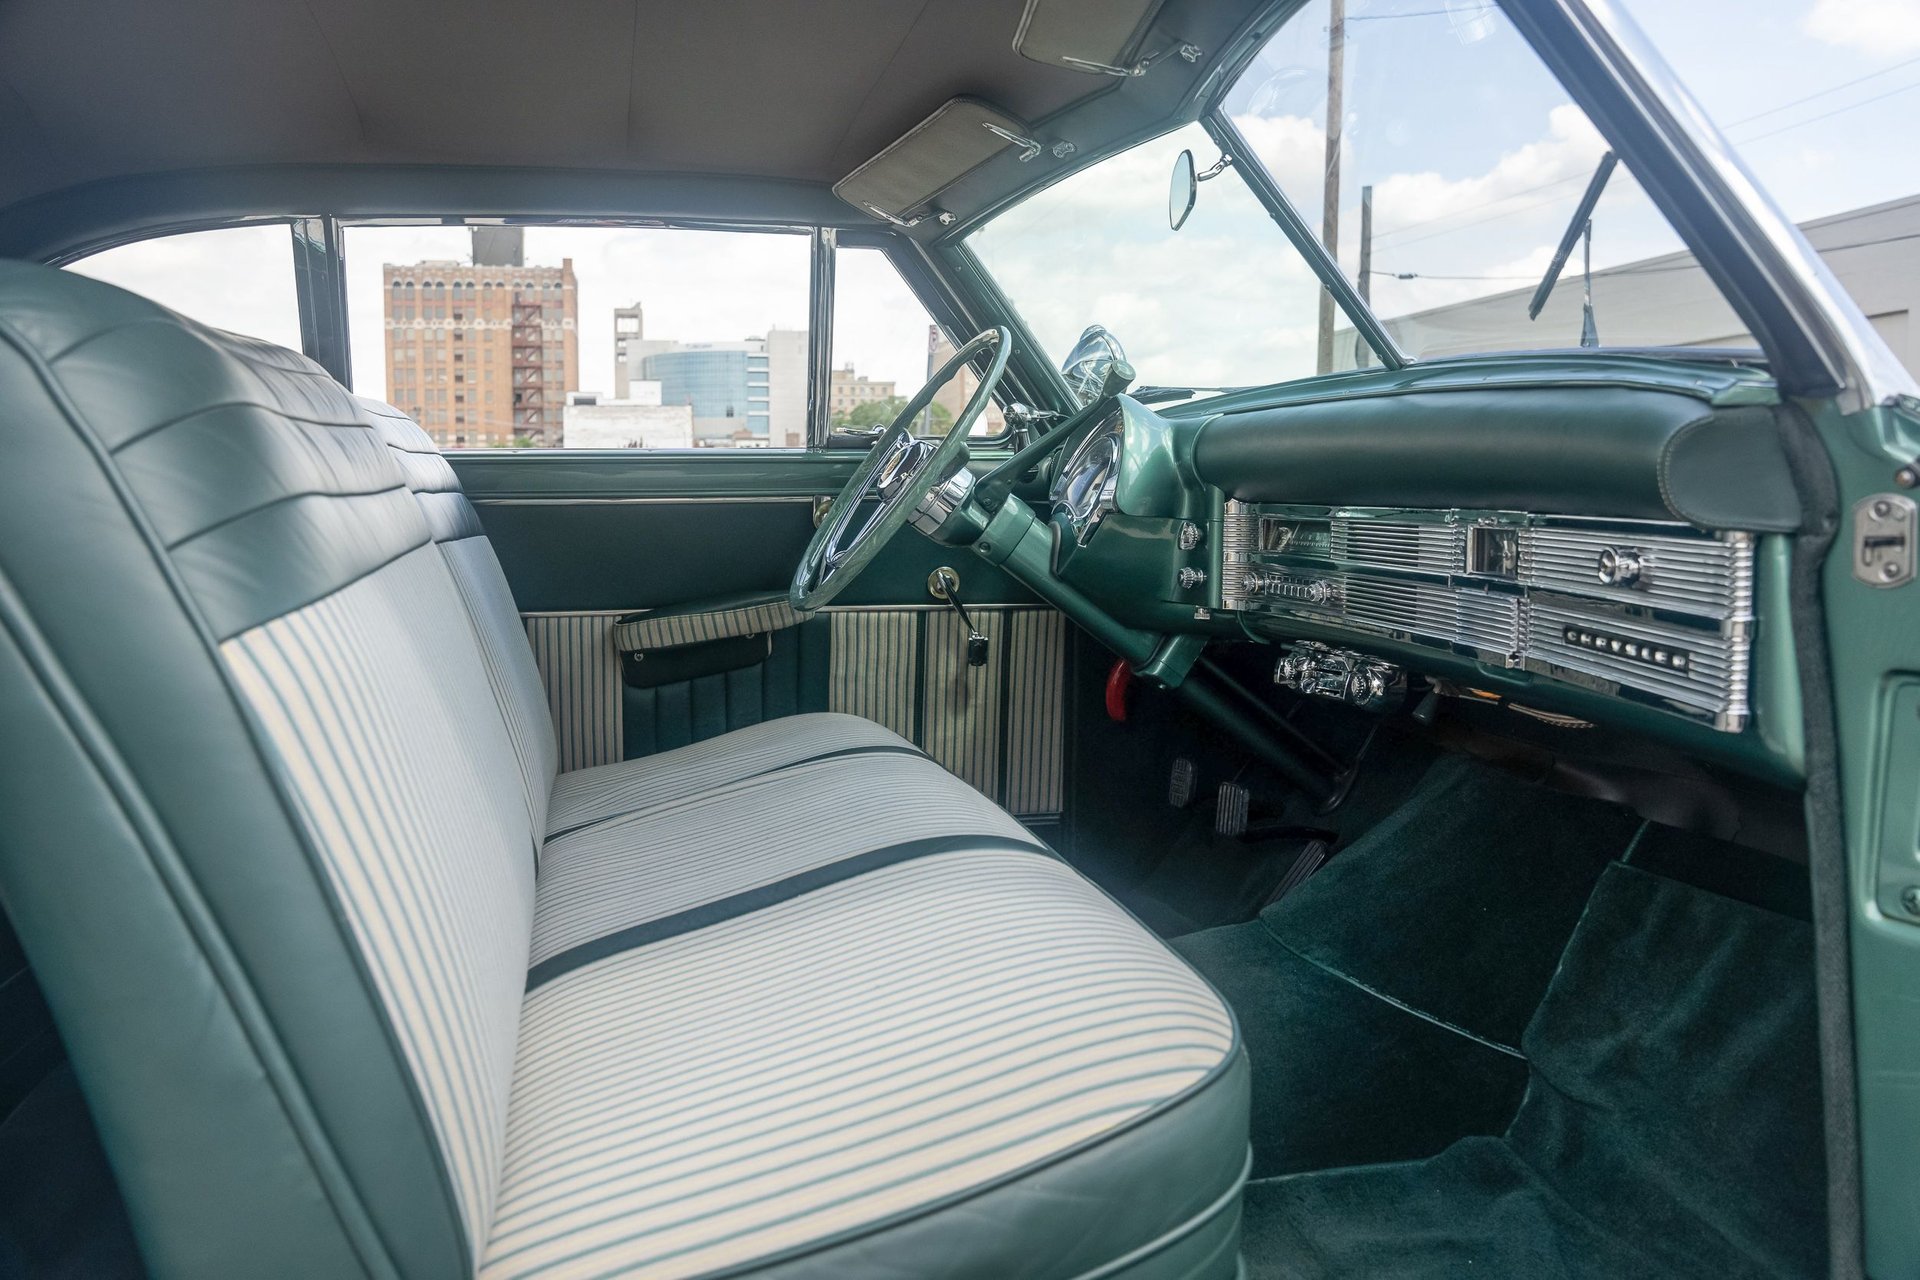 For Sale 1950 Chrysler Town and Country